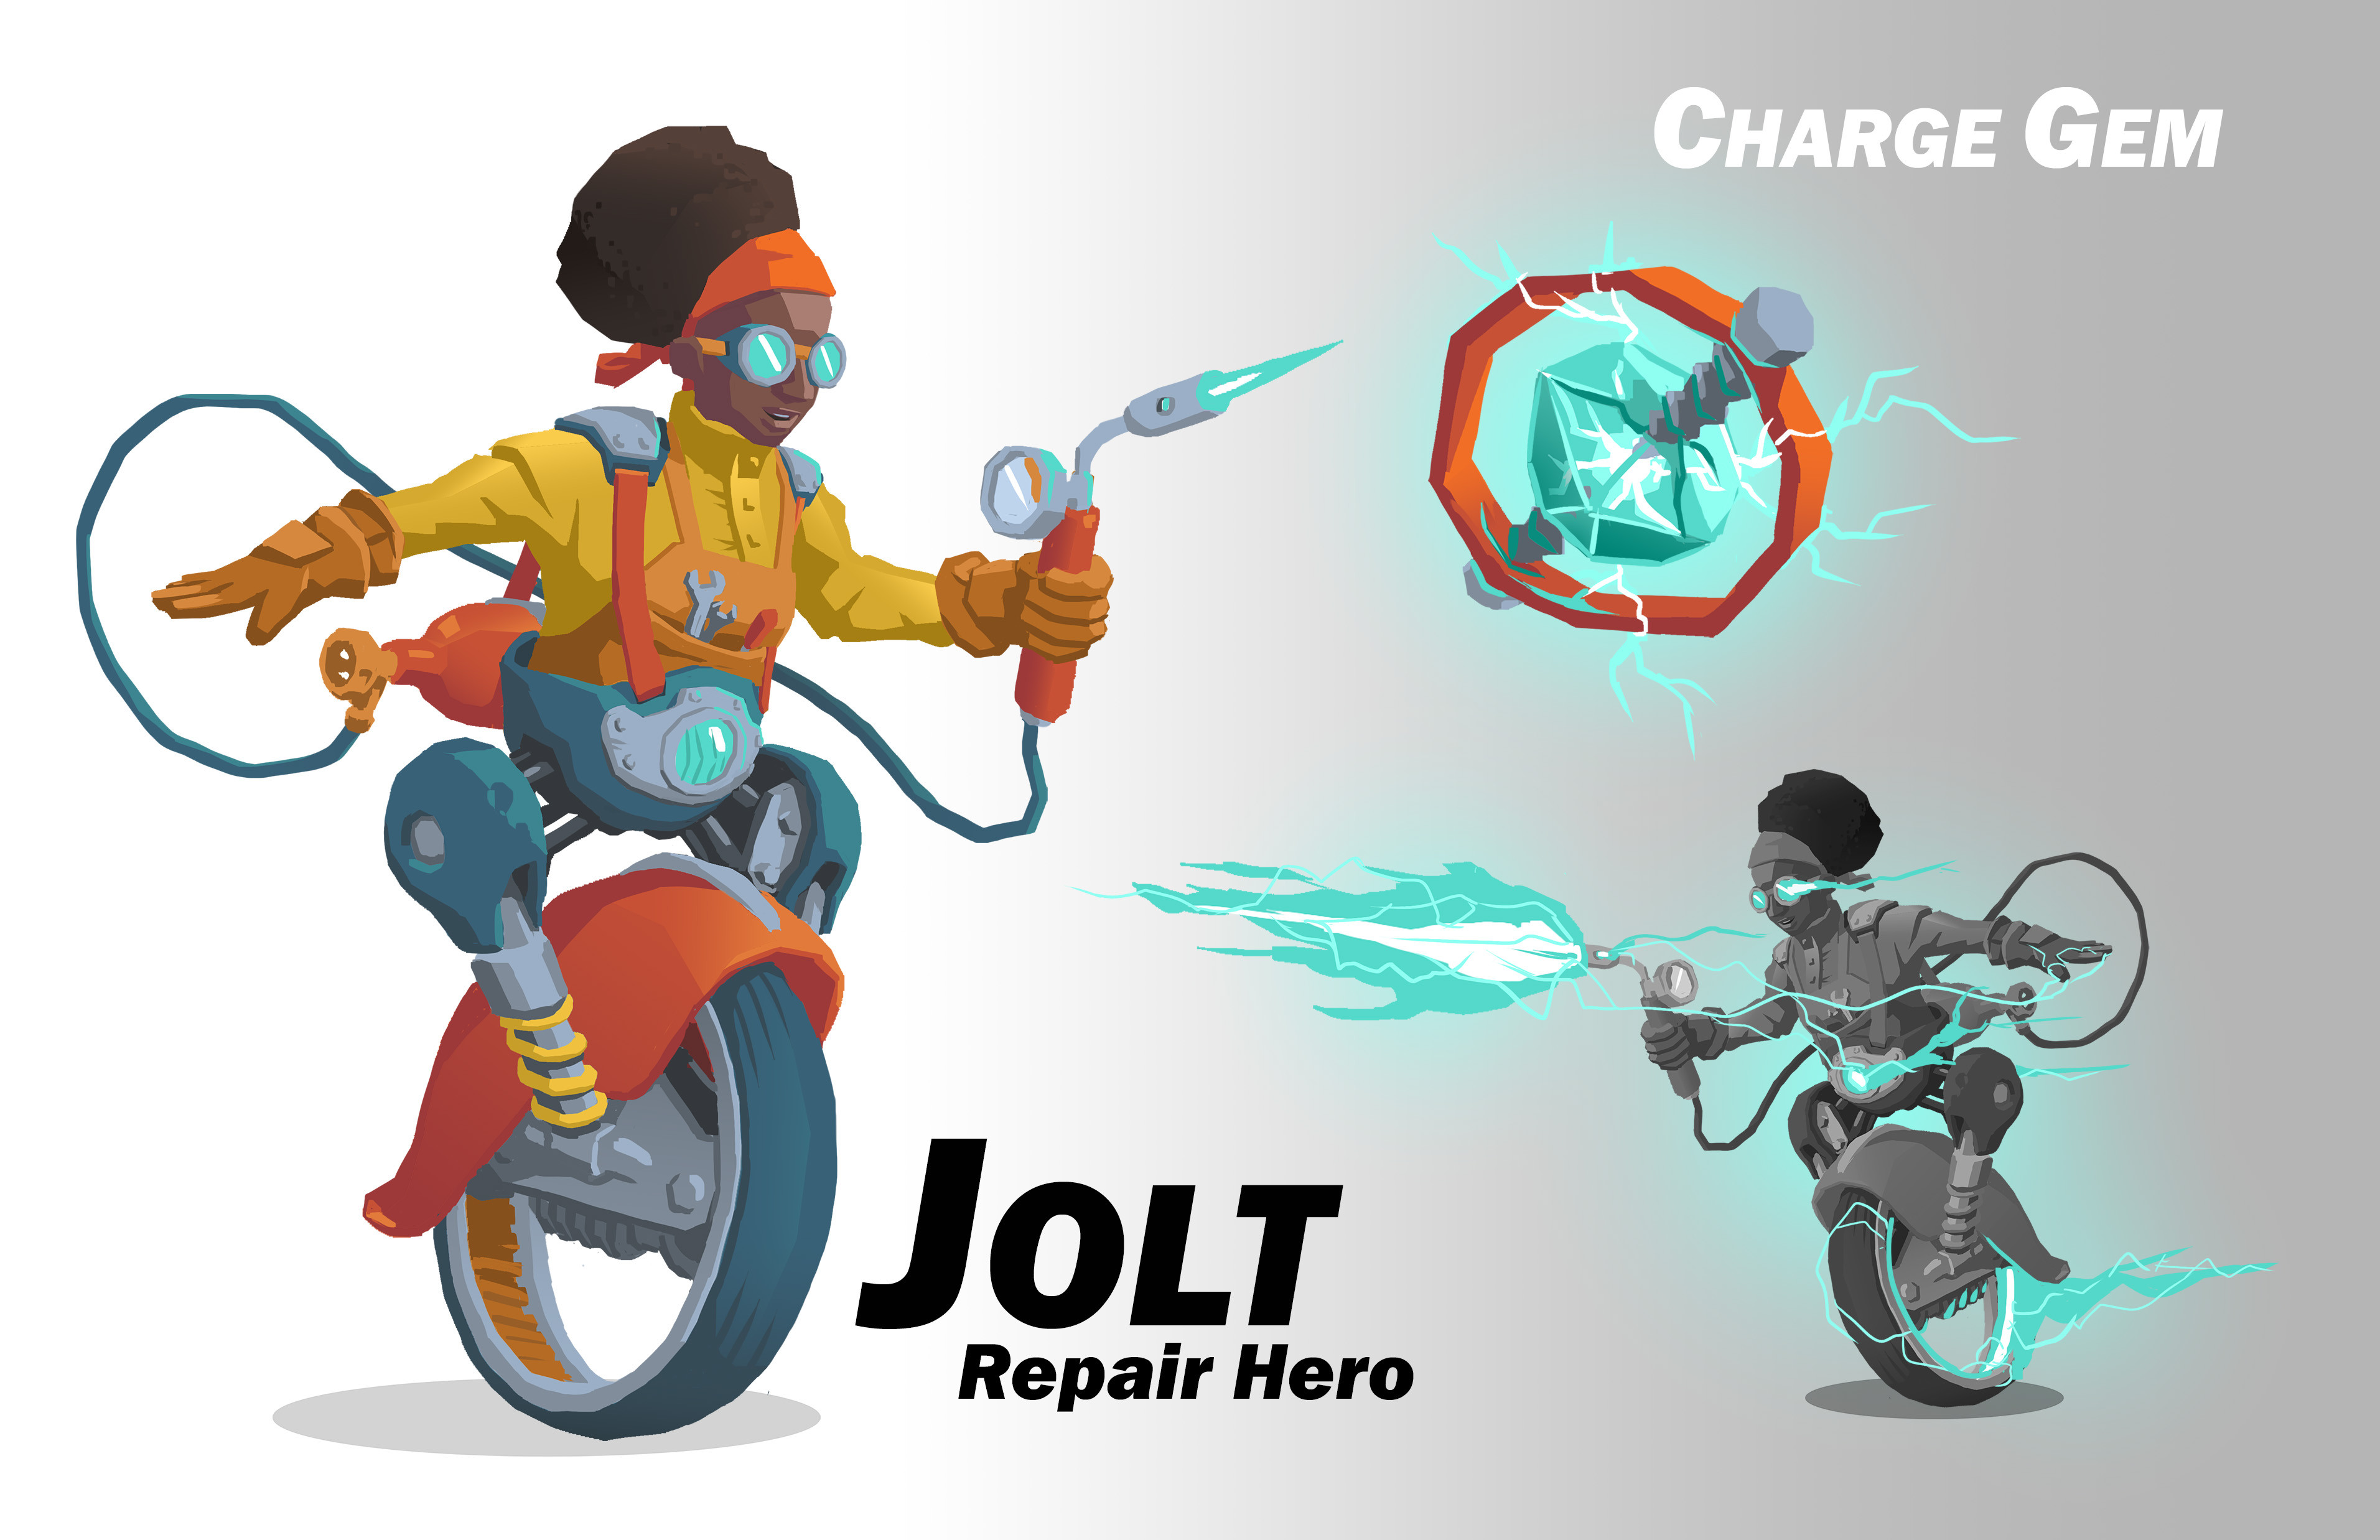 When powered up with a Charge Gem, Jolt's speed and powers are supercharged with crackling electrical energy!